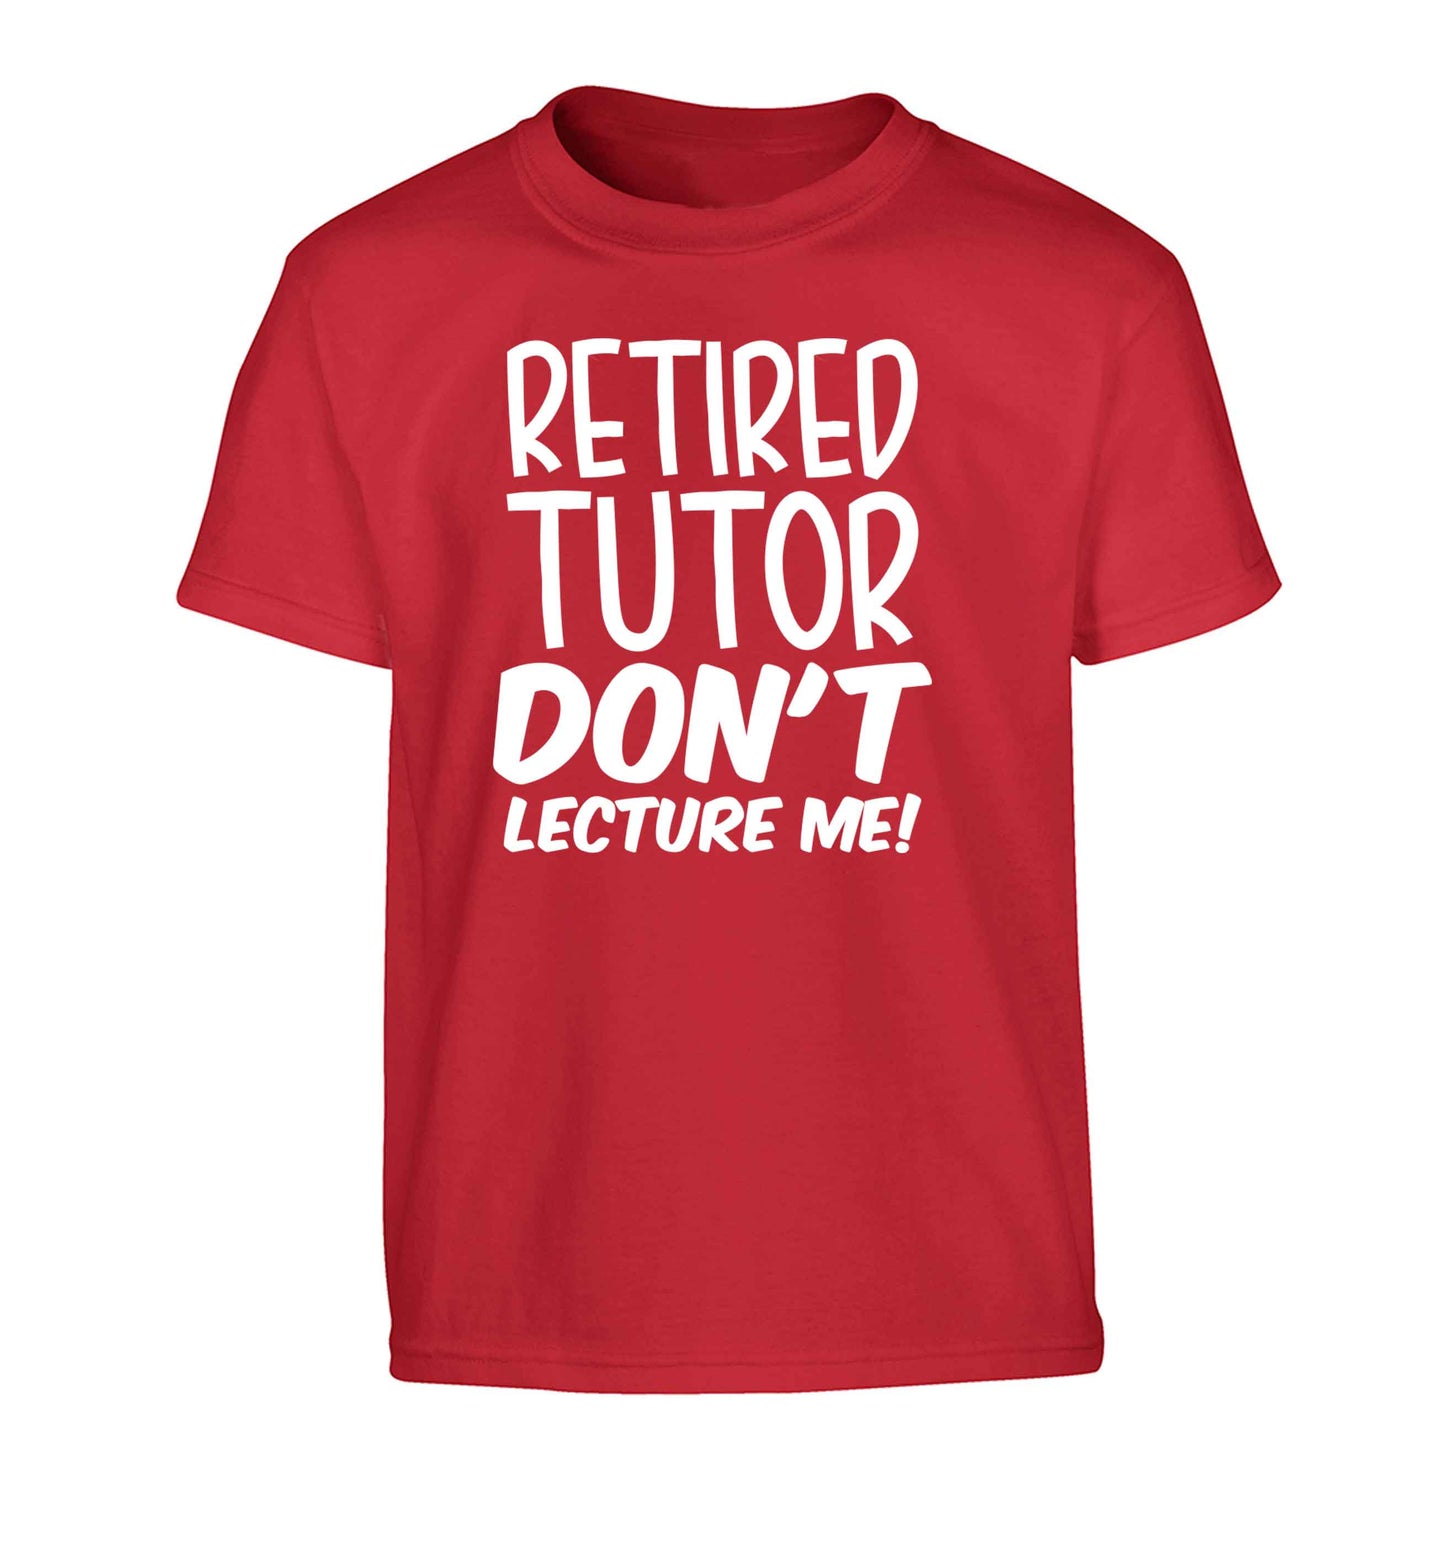 Retired tutor don't lecture me! Children's red Tshirt 12-13 Years